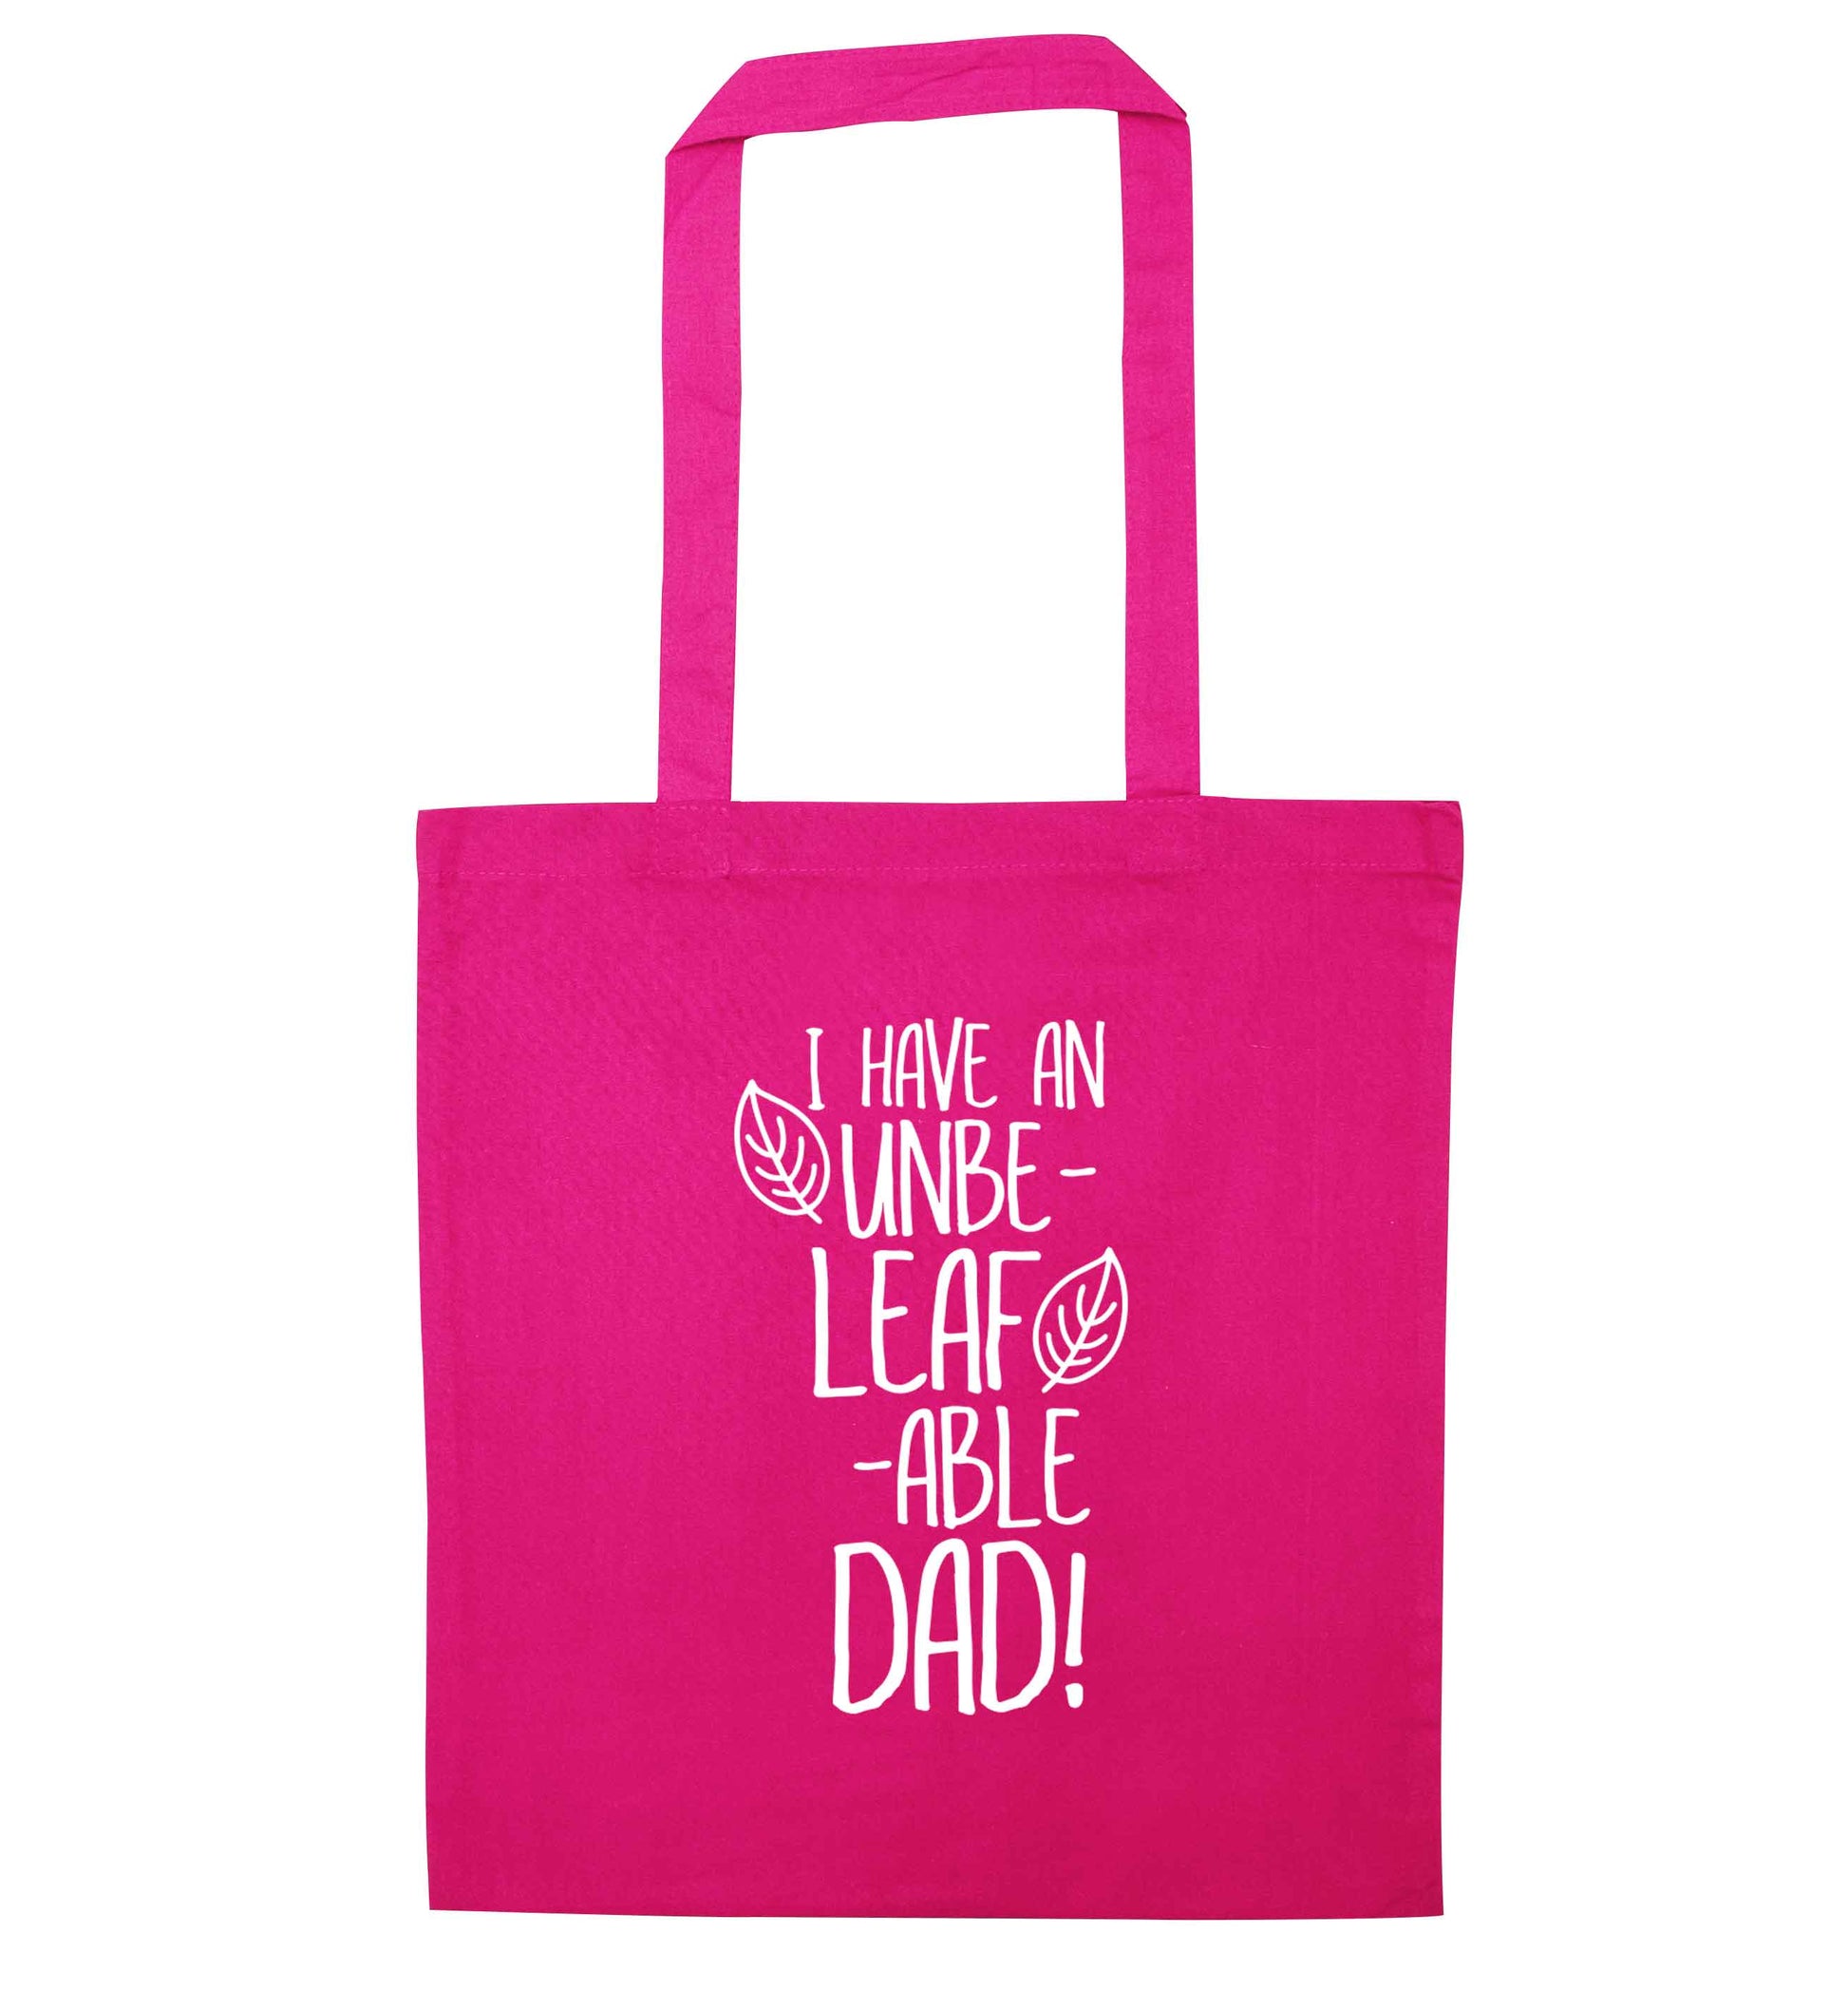 I have an unbe-leaf-able dad pink tote bag